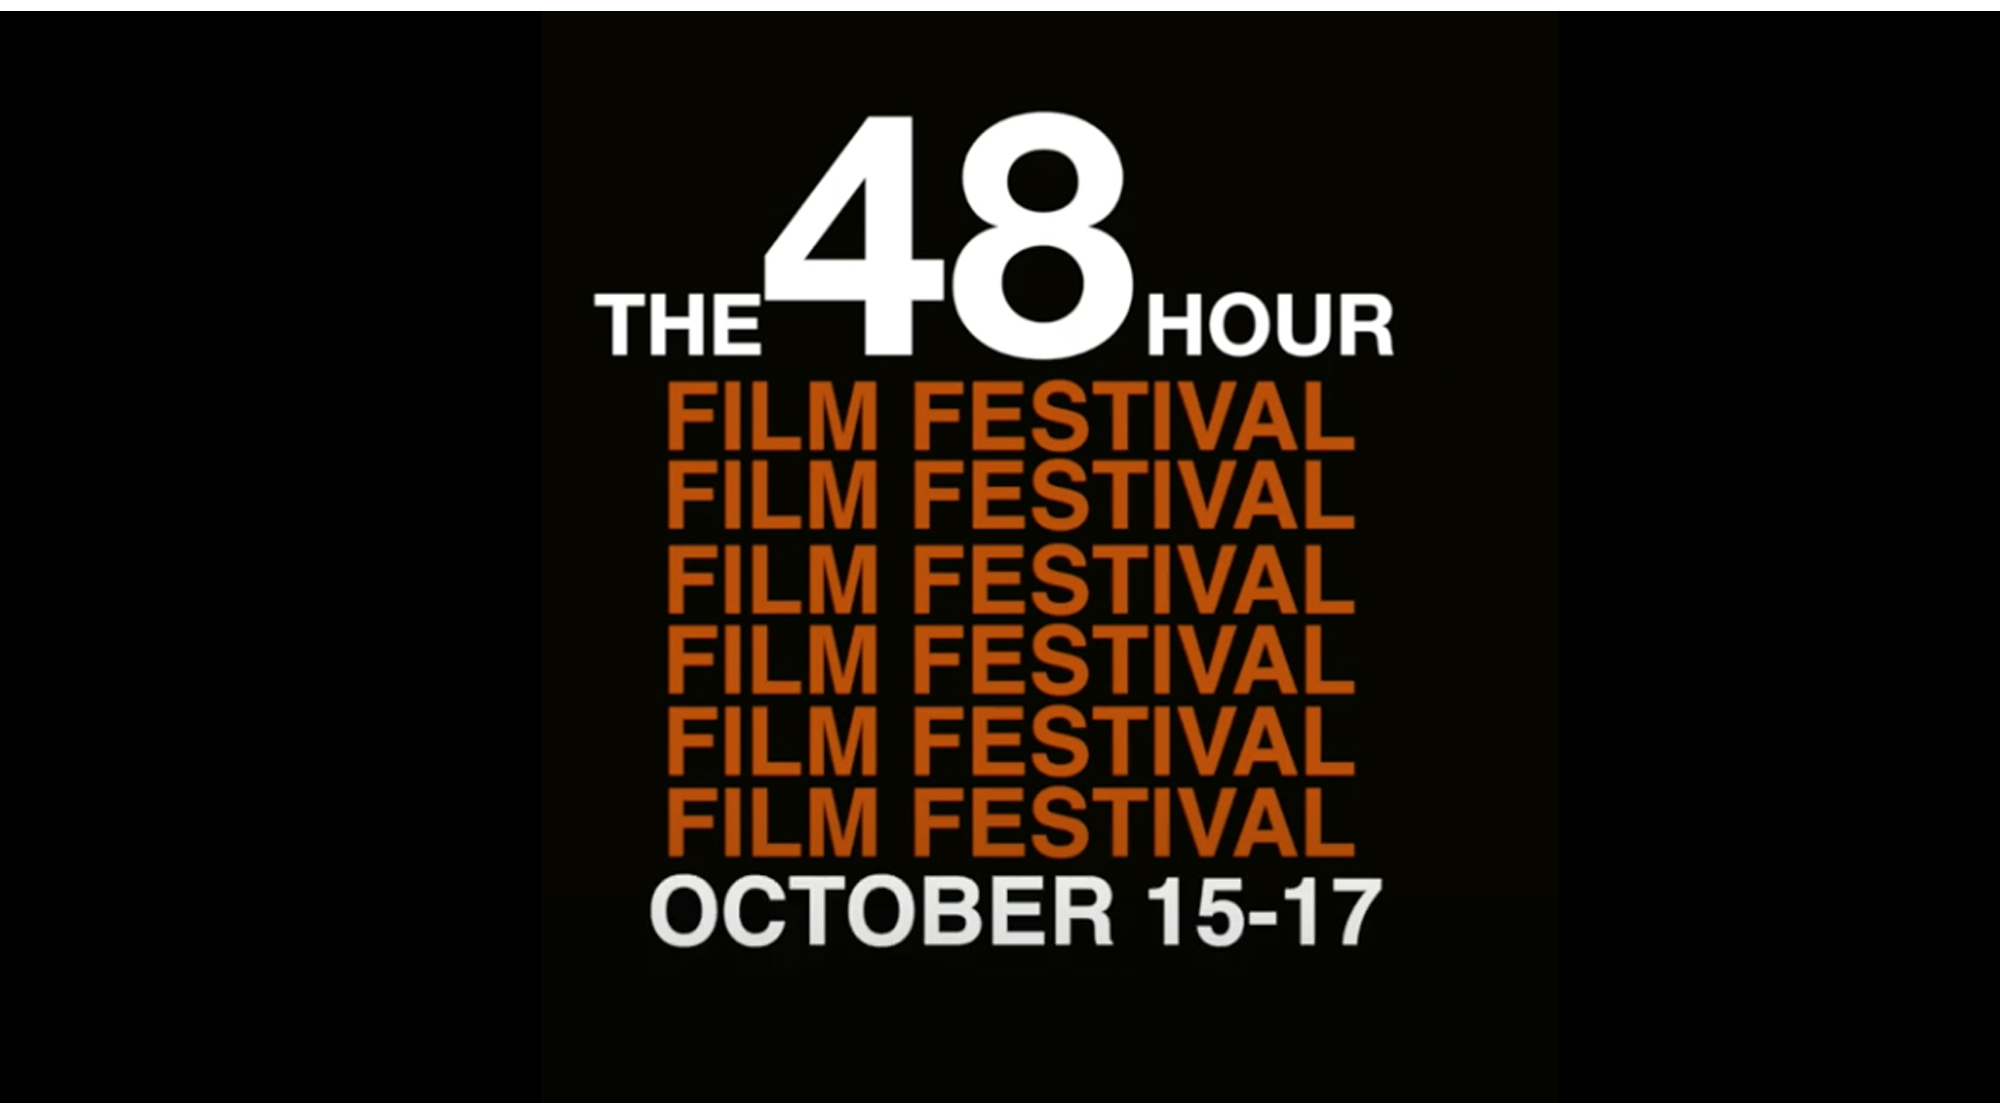 48 Hour Film Festival holds Screening and Announces Winners Film